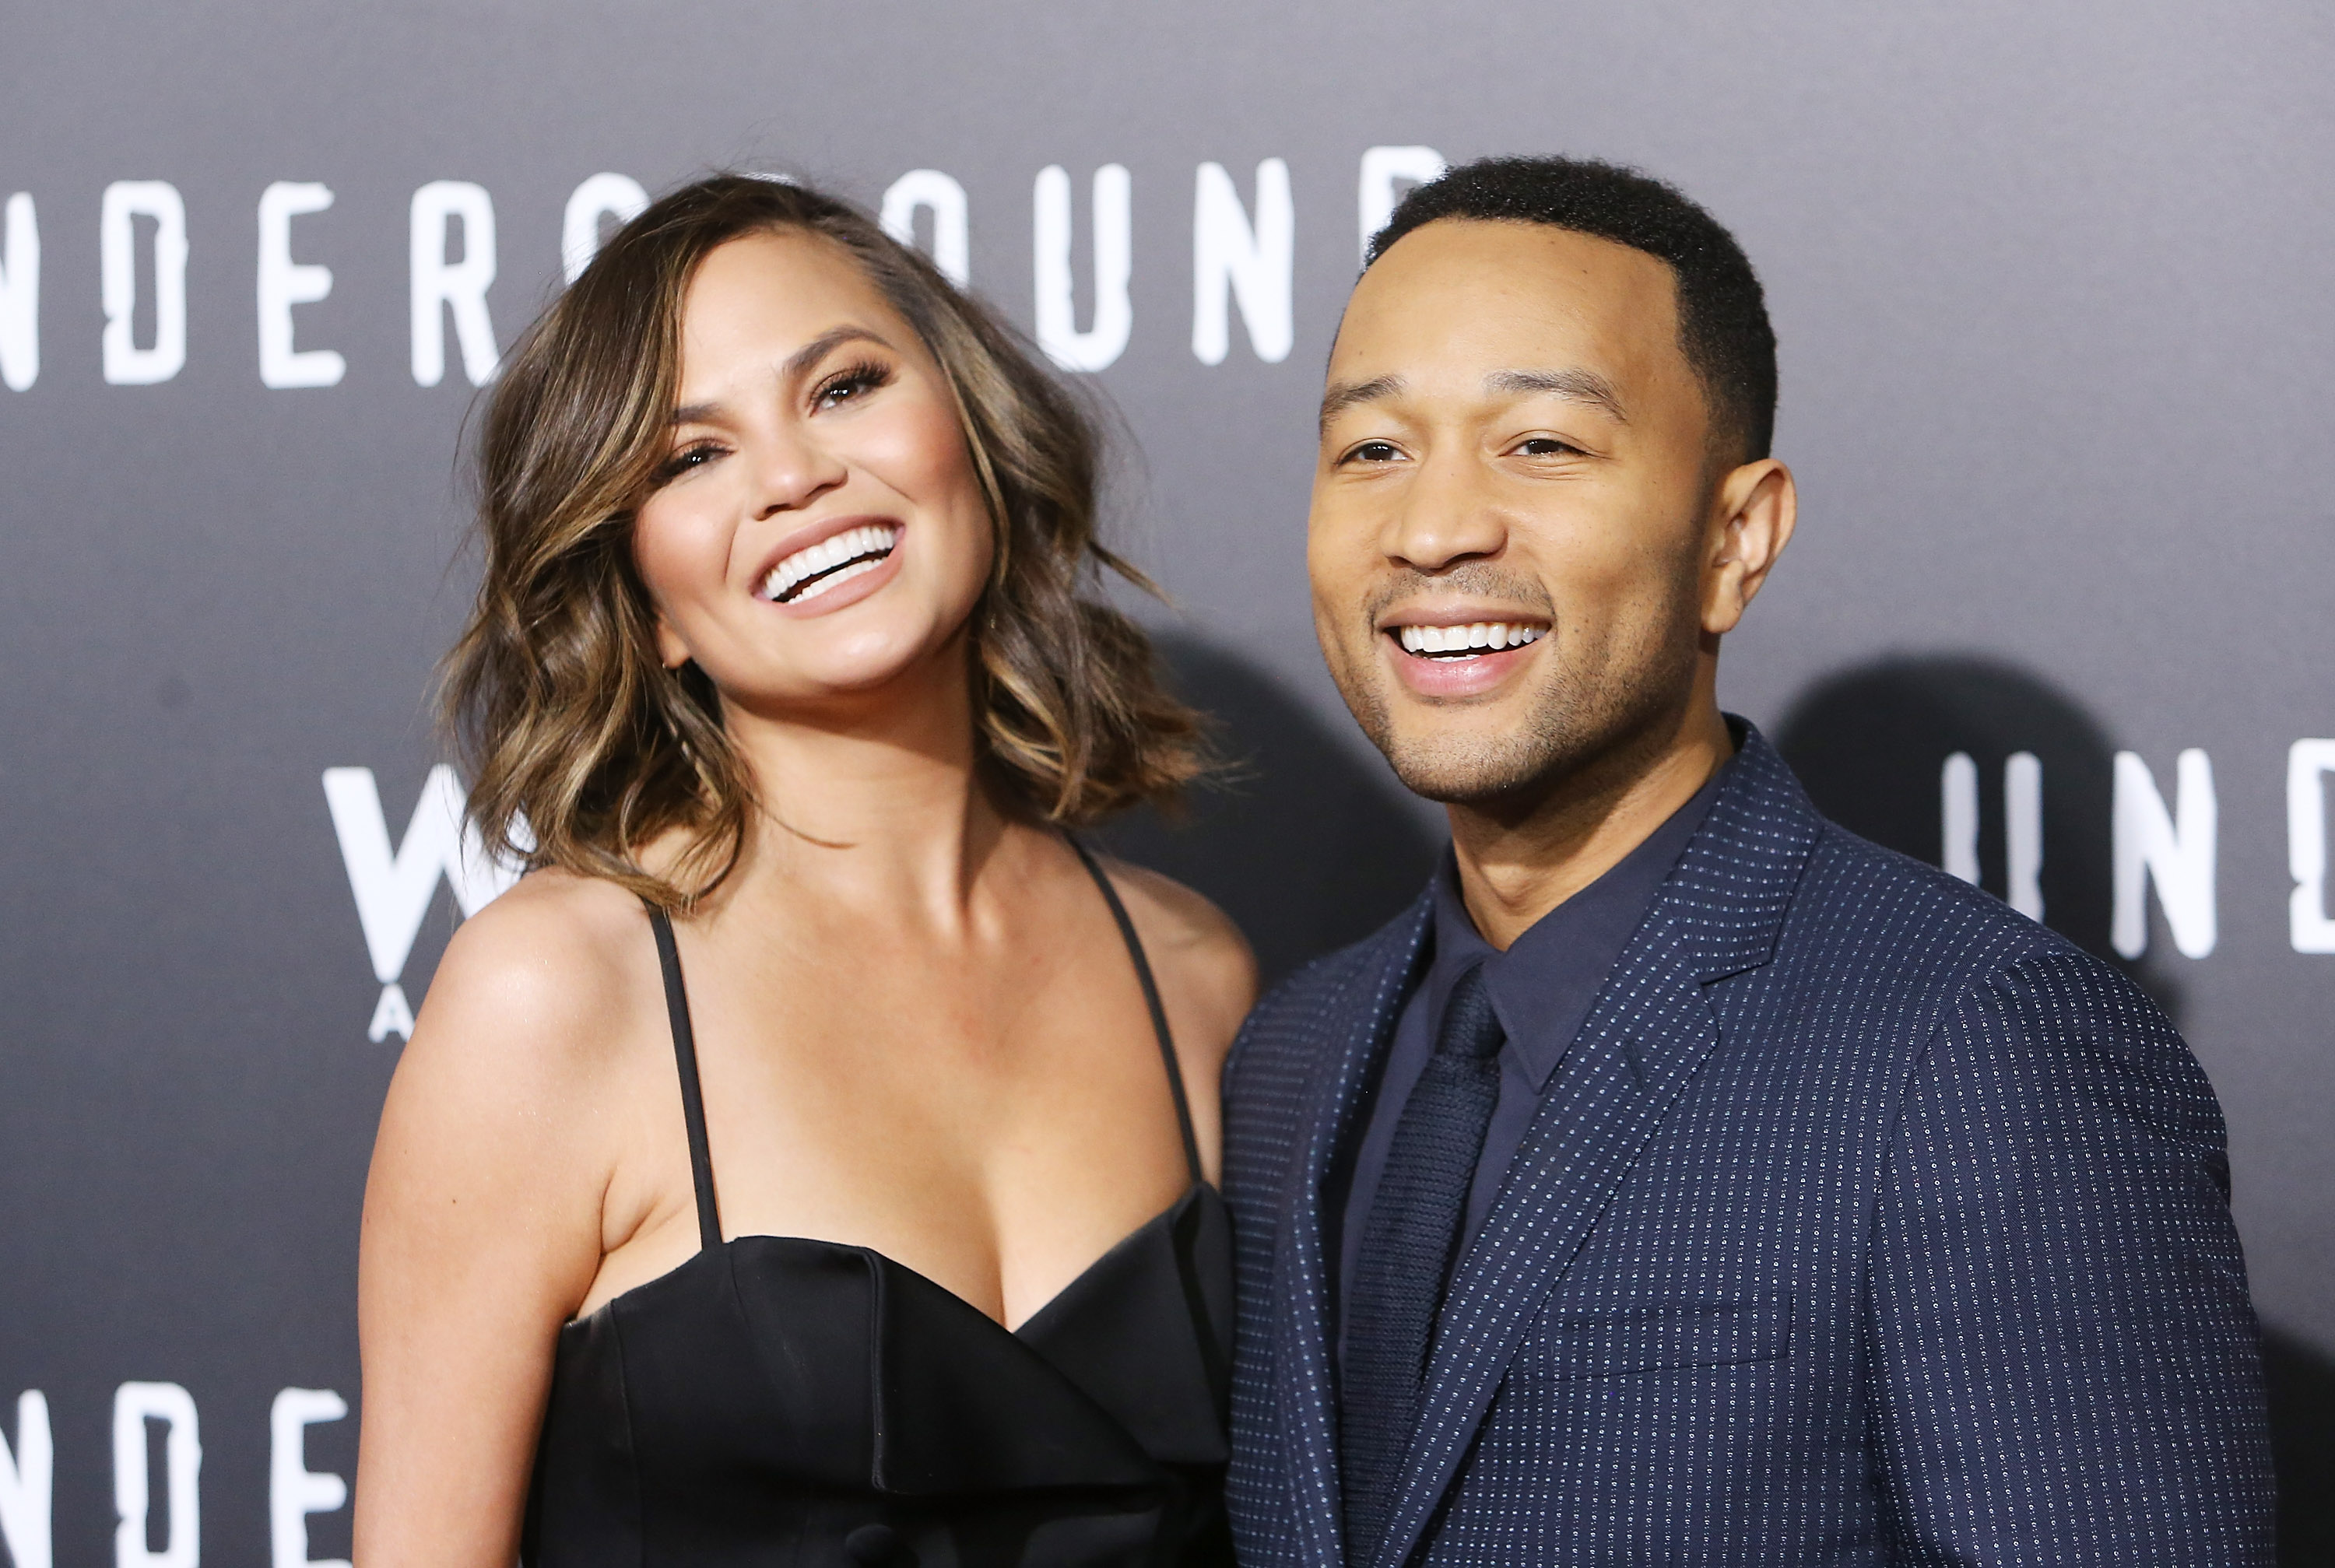 LOS ANGELES, CA - FEBRUARY 28:  Chrissy Teigen and John Legend arrive at WGN America's "Underground" season 2 held at Westwood Village on February 28, 2017 in Los Angeles, California.  (Photo by Michael Tran/FilmMagic) (Michael Tran&mdash;FilmMagic)